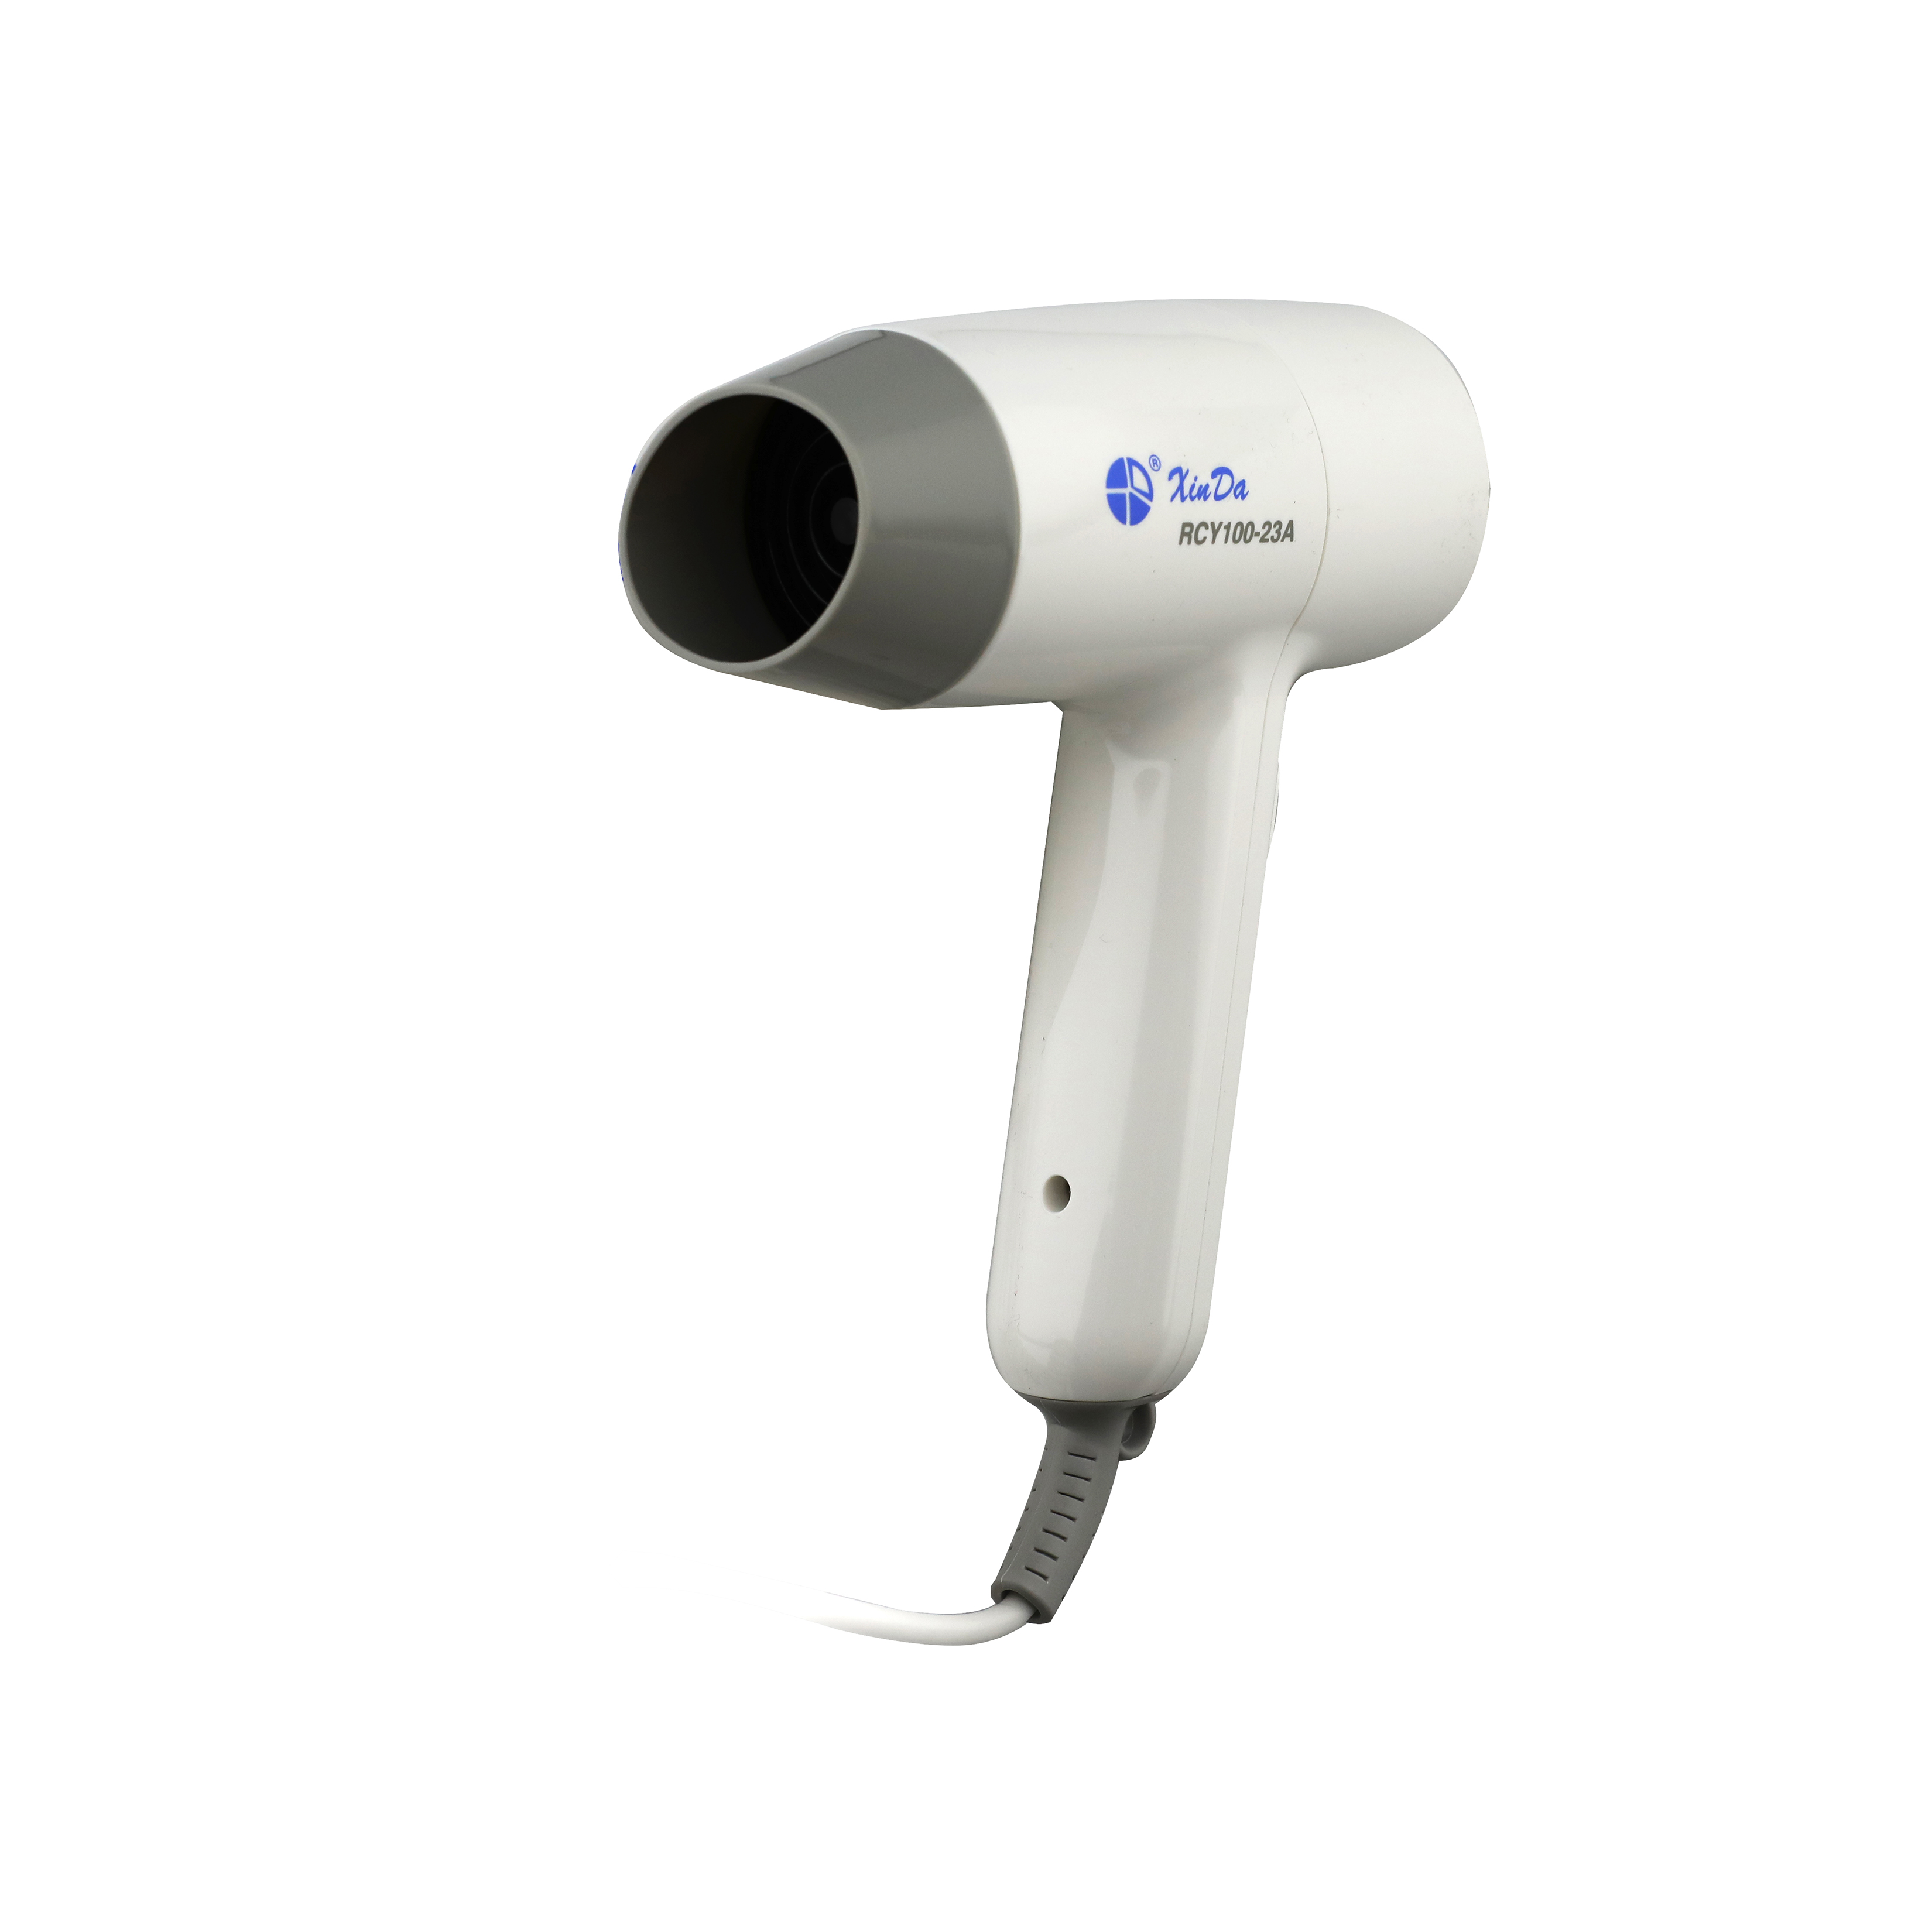 XINDA ABS Plastic Hair Dryer For Hotel Bathroom Wall-Mounted Professional Hair Dryer RCY-100